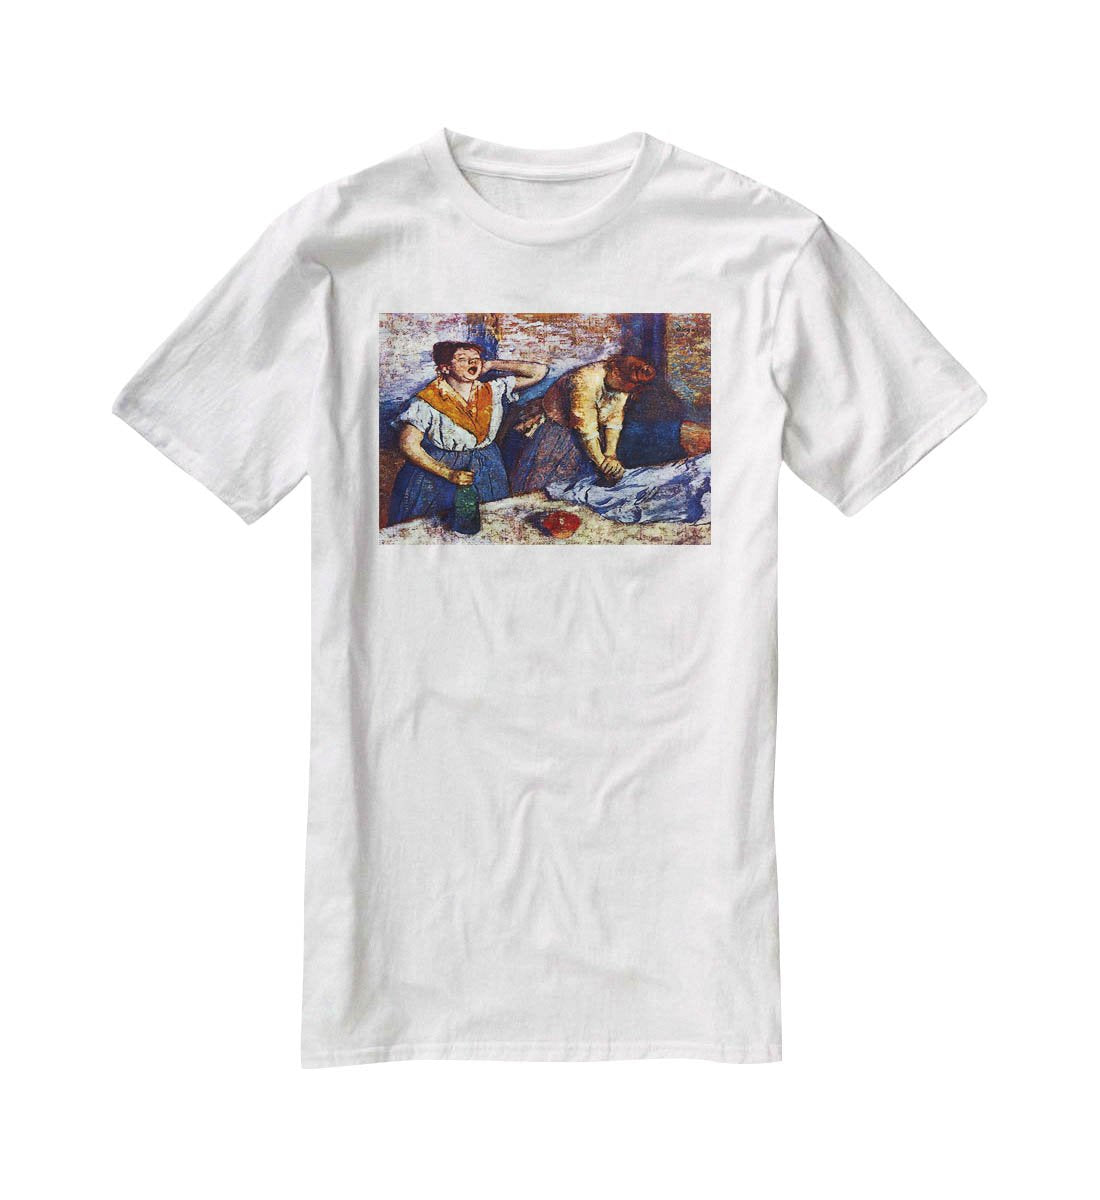 Two cleaning women by Degas T-Shirt - Canvas Art Rocks - 5